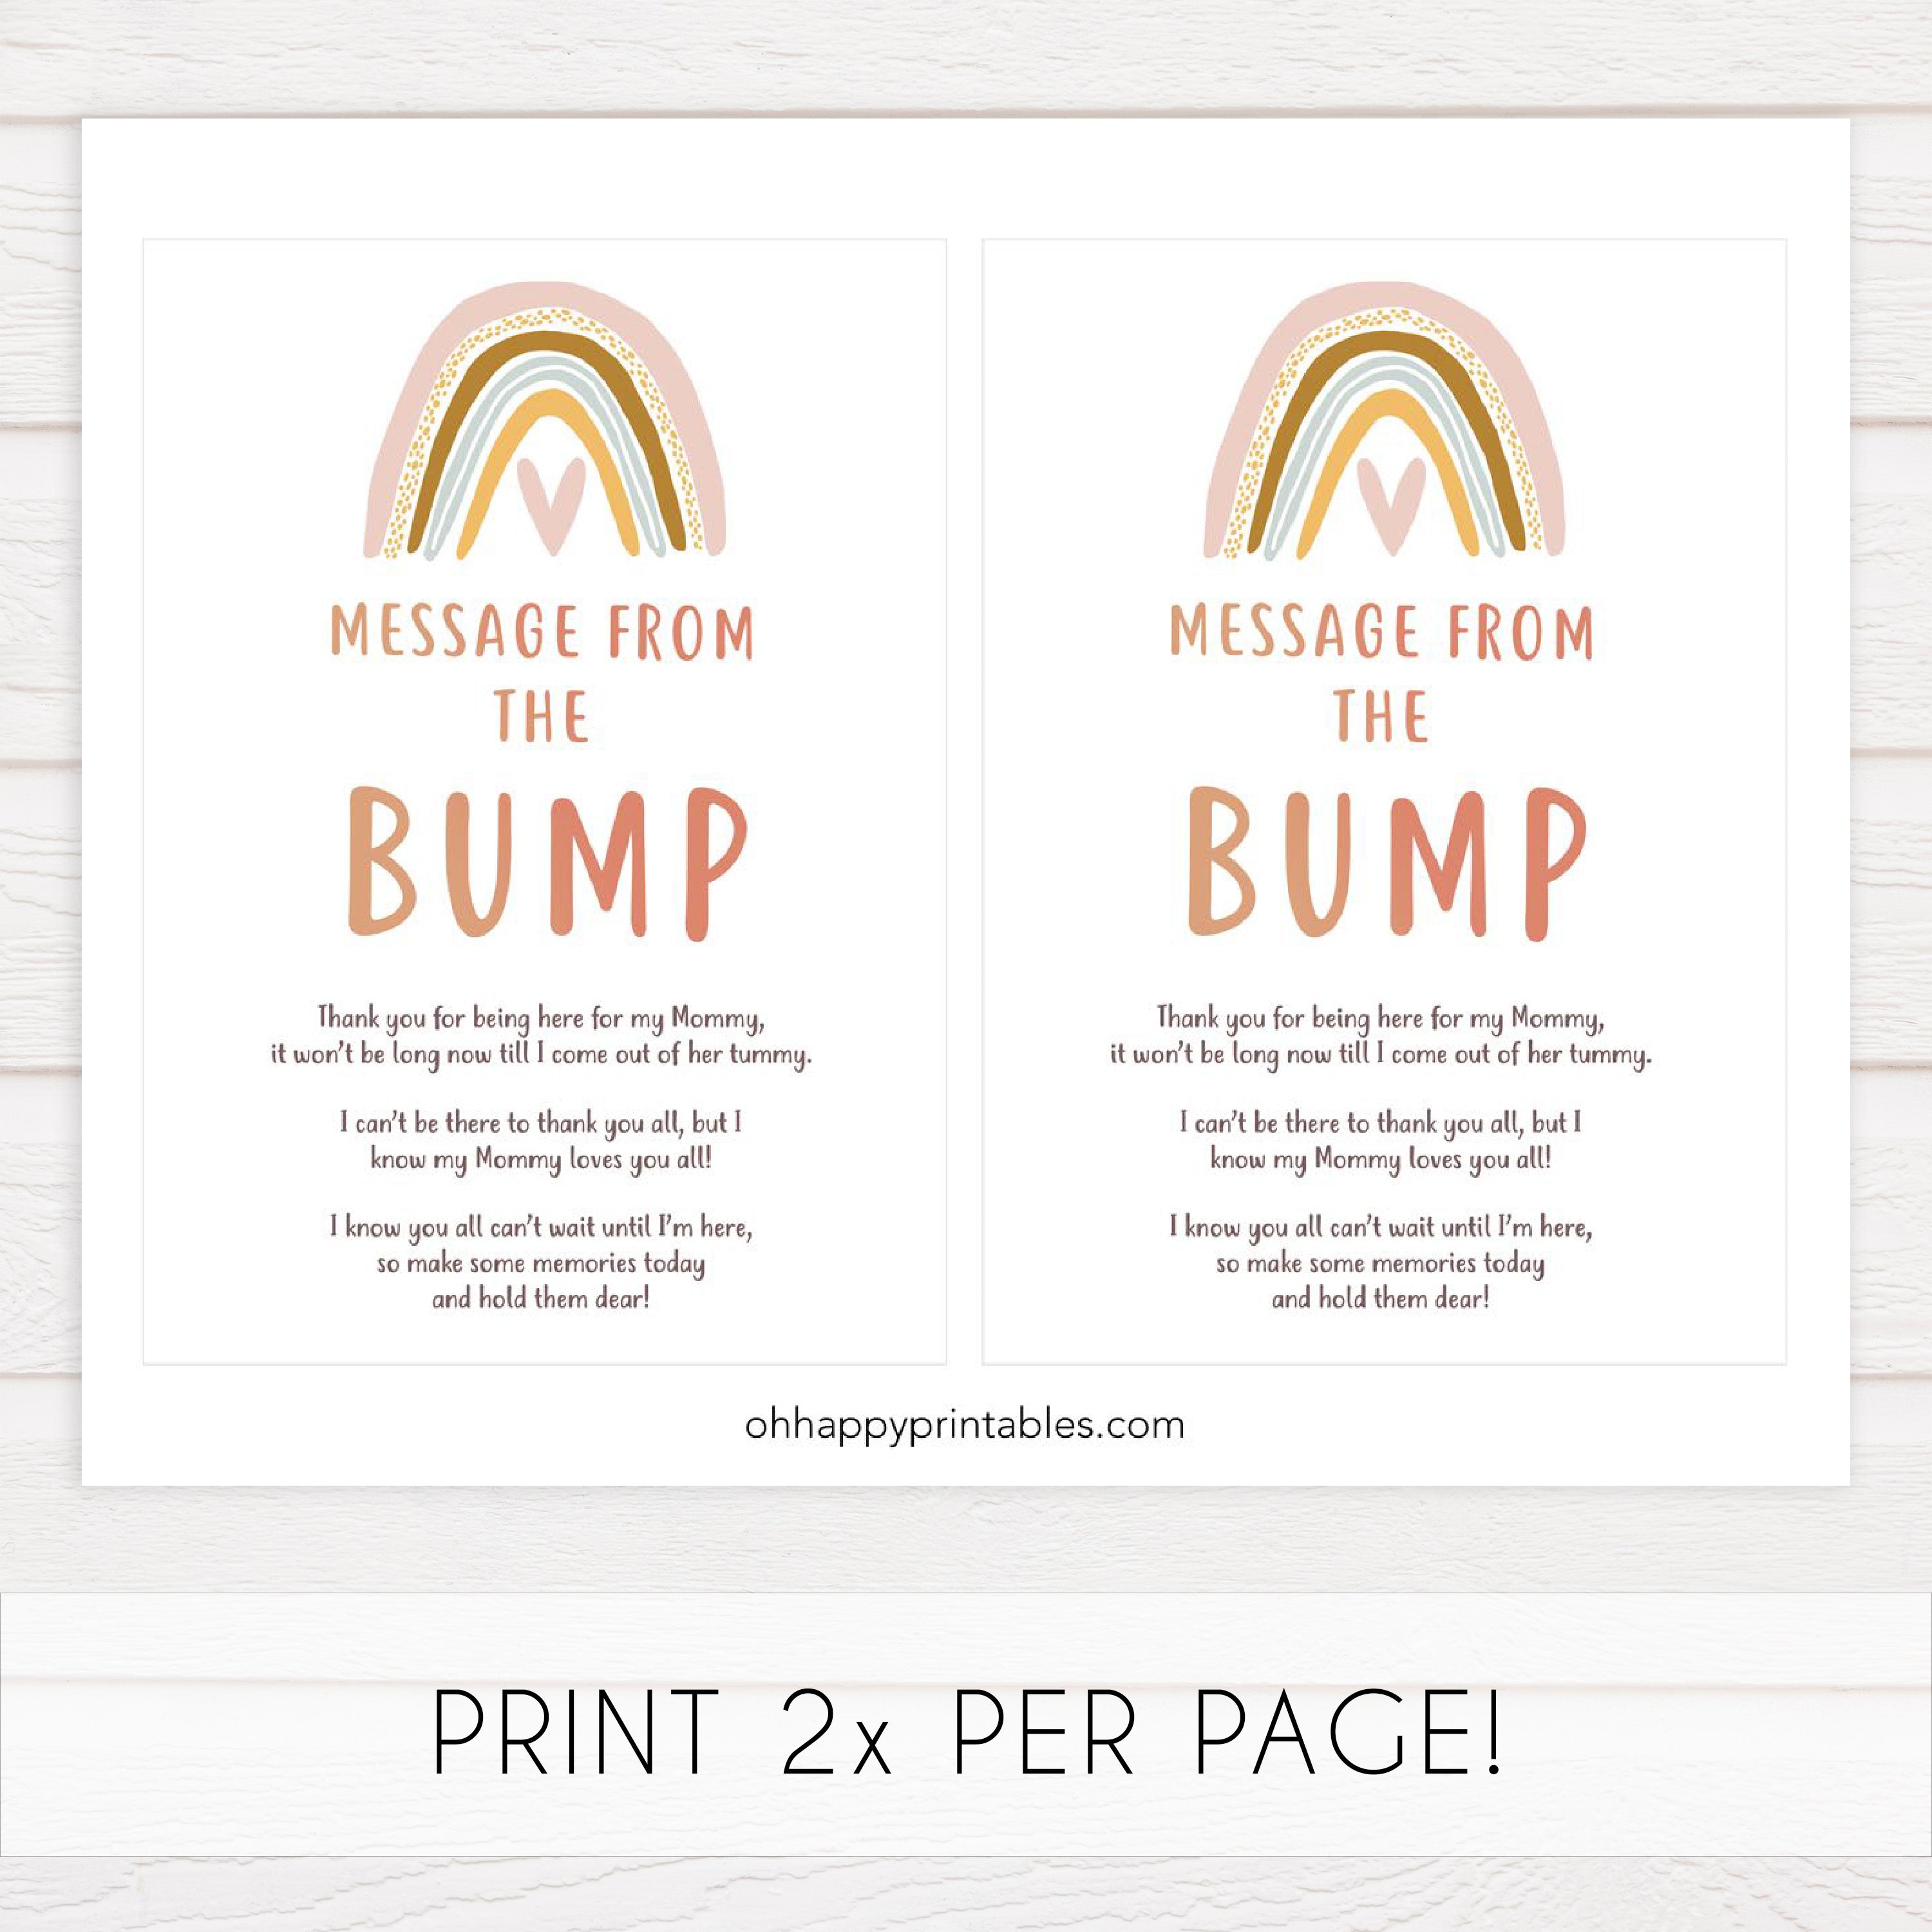 message from the bump game, Printable baby shower games, boho rainbow baby games, baby shower games, fun baby shower ideas, top baby shower ideas, boho rainbow baby shower, baby shower games, fun boho rainbow baby shower ideas